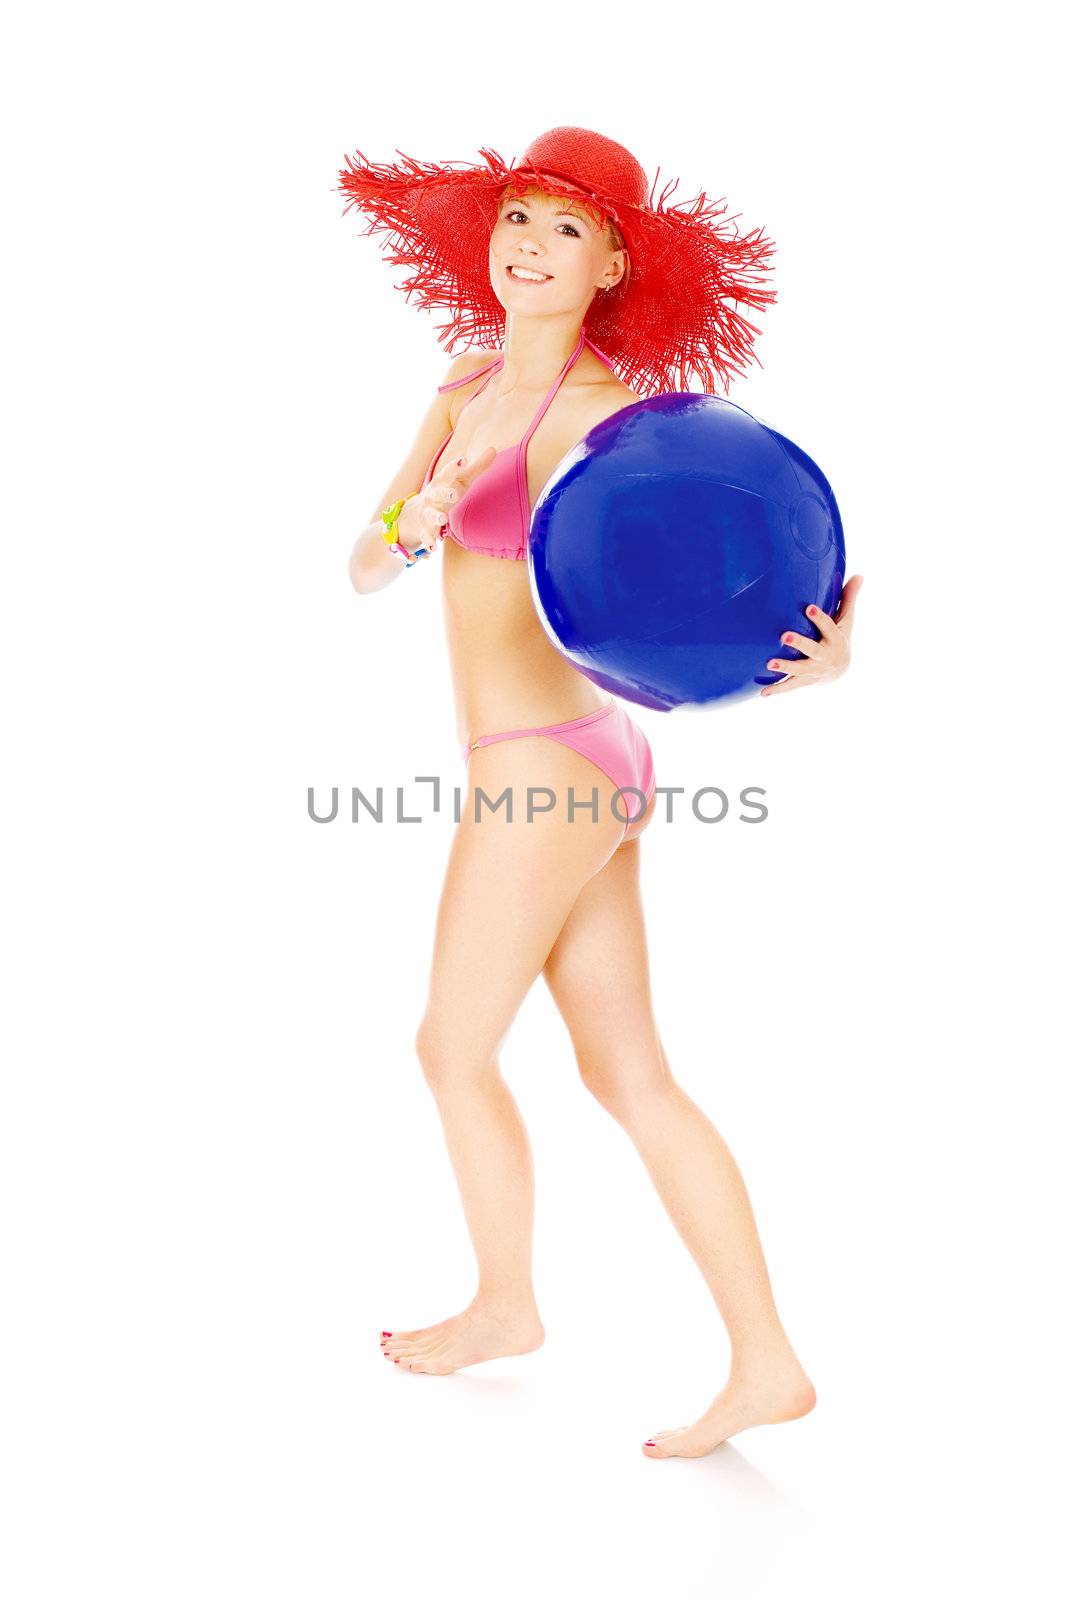 Young girl in bikini runing and hold blue ball, isolated on white background